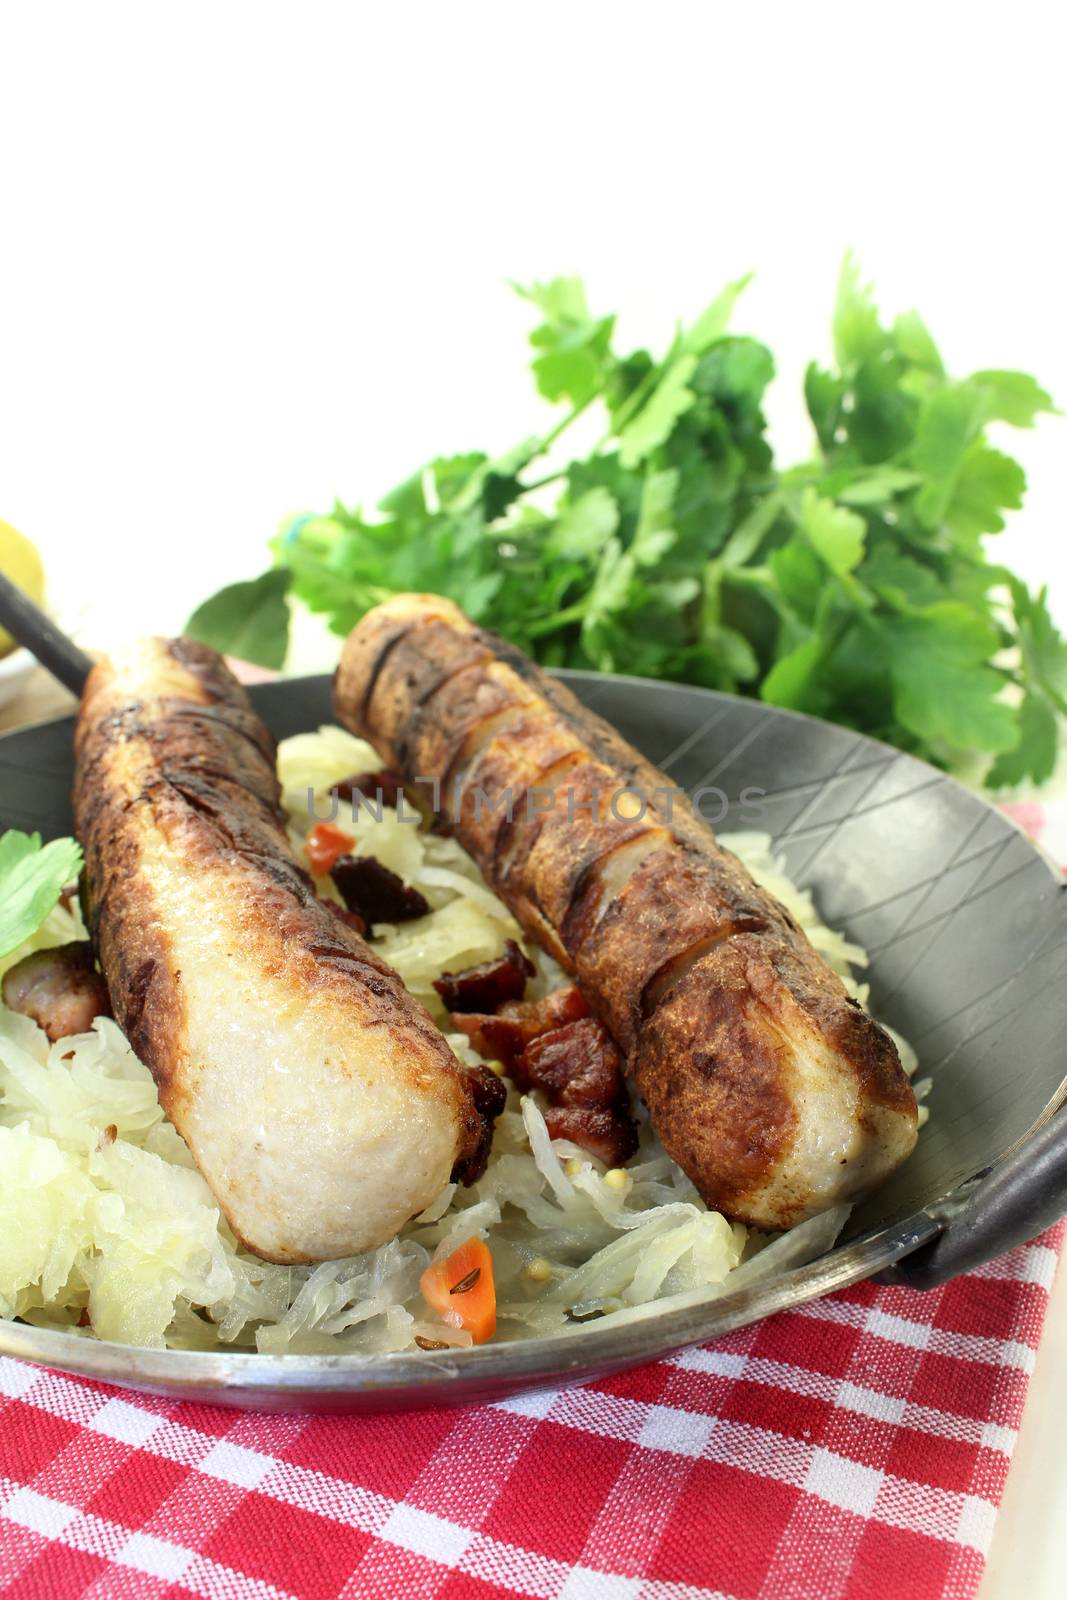 fried sausage with sourcrout by silencefoto